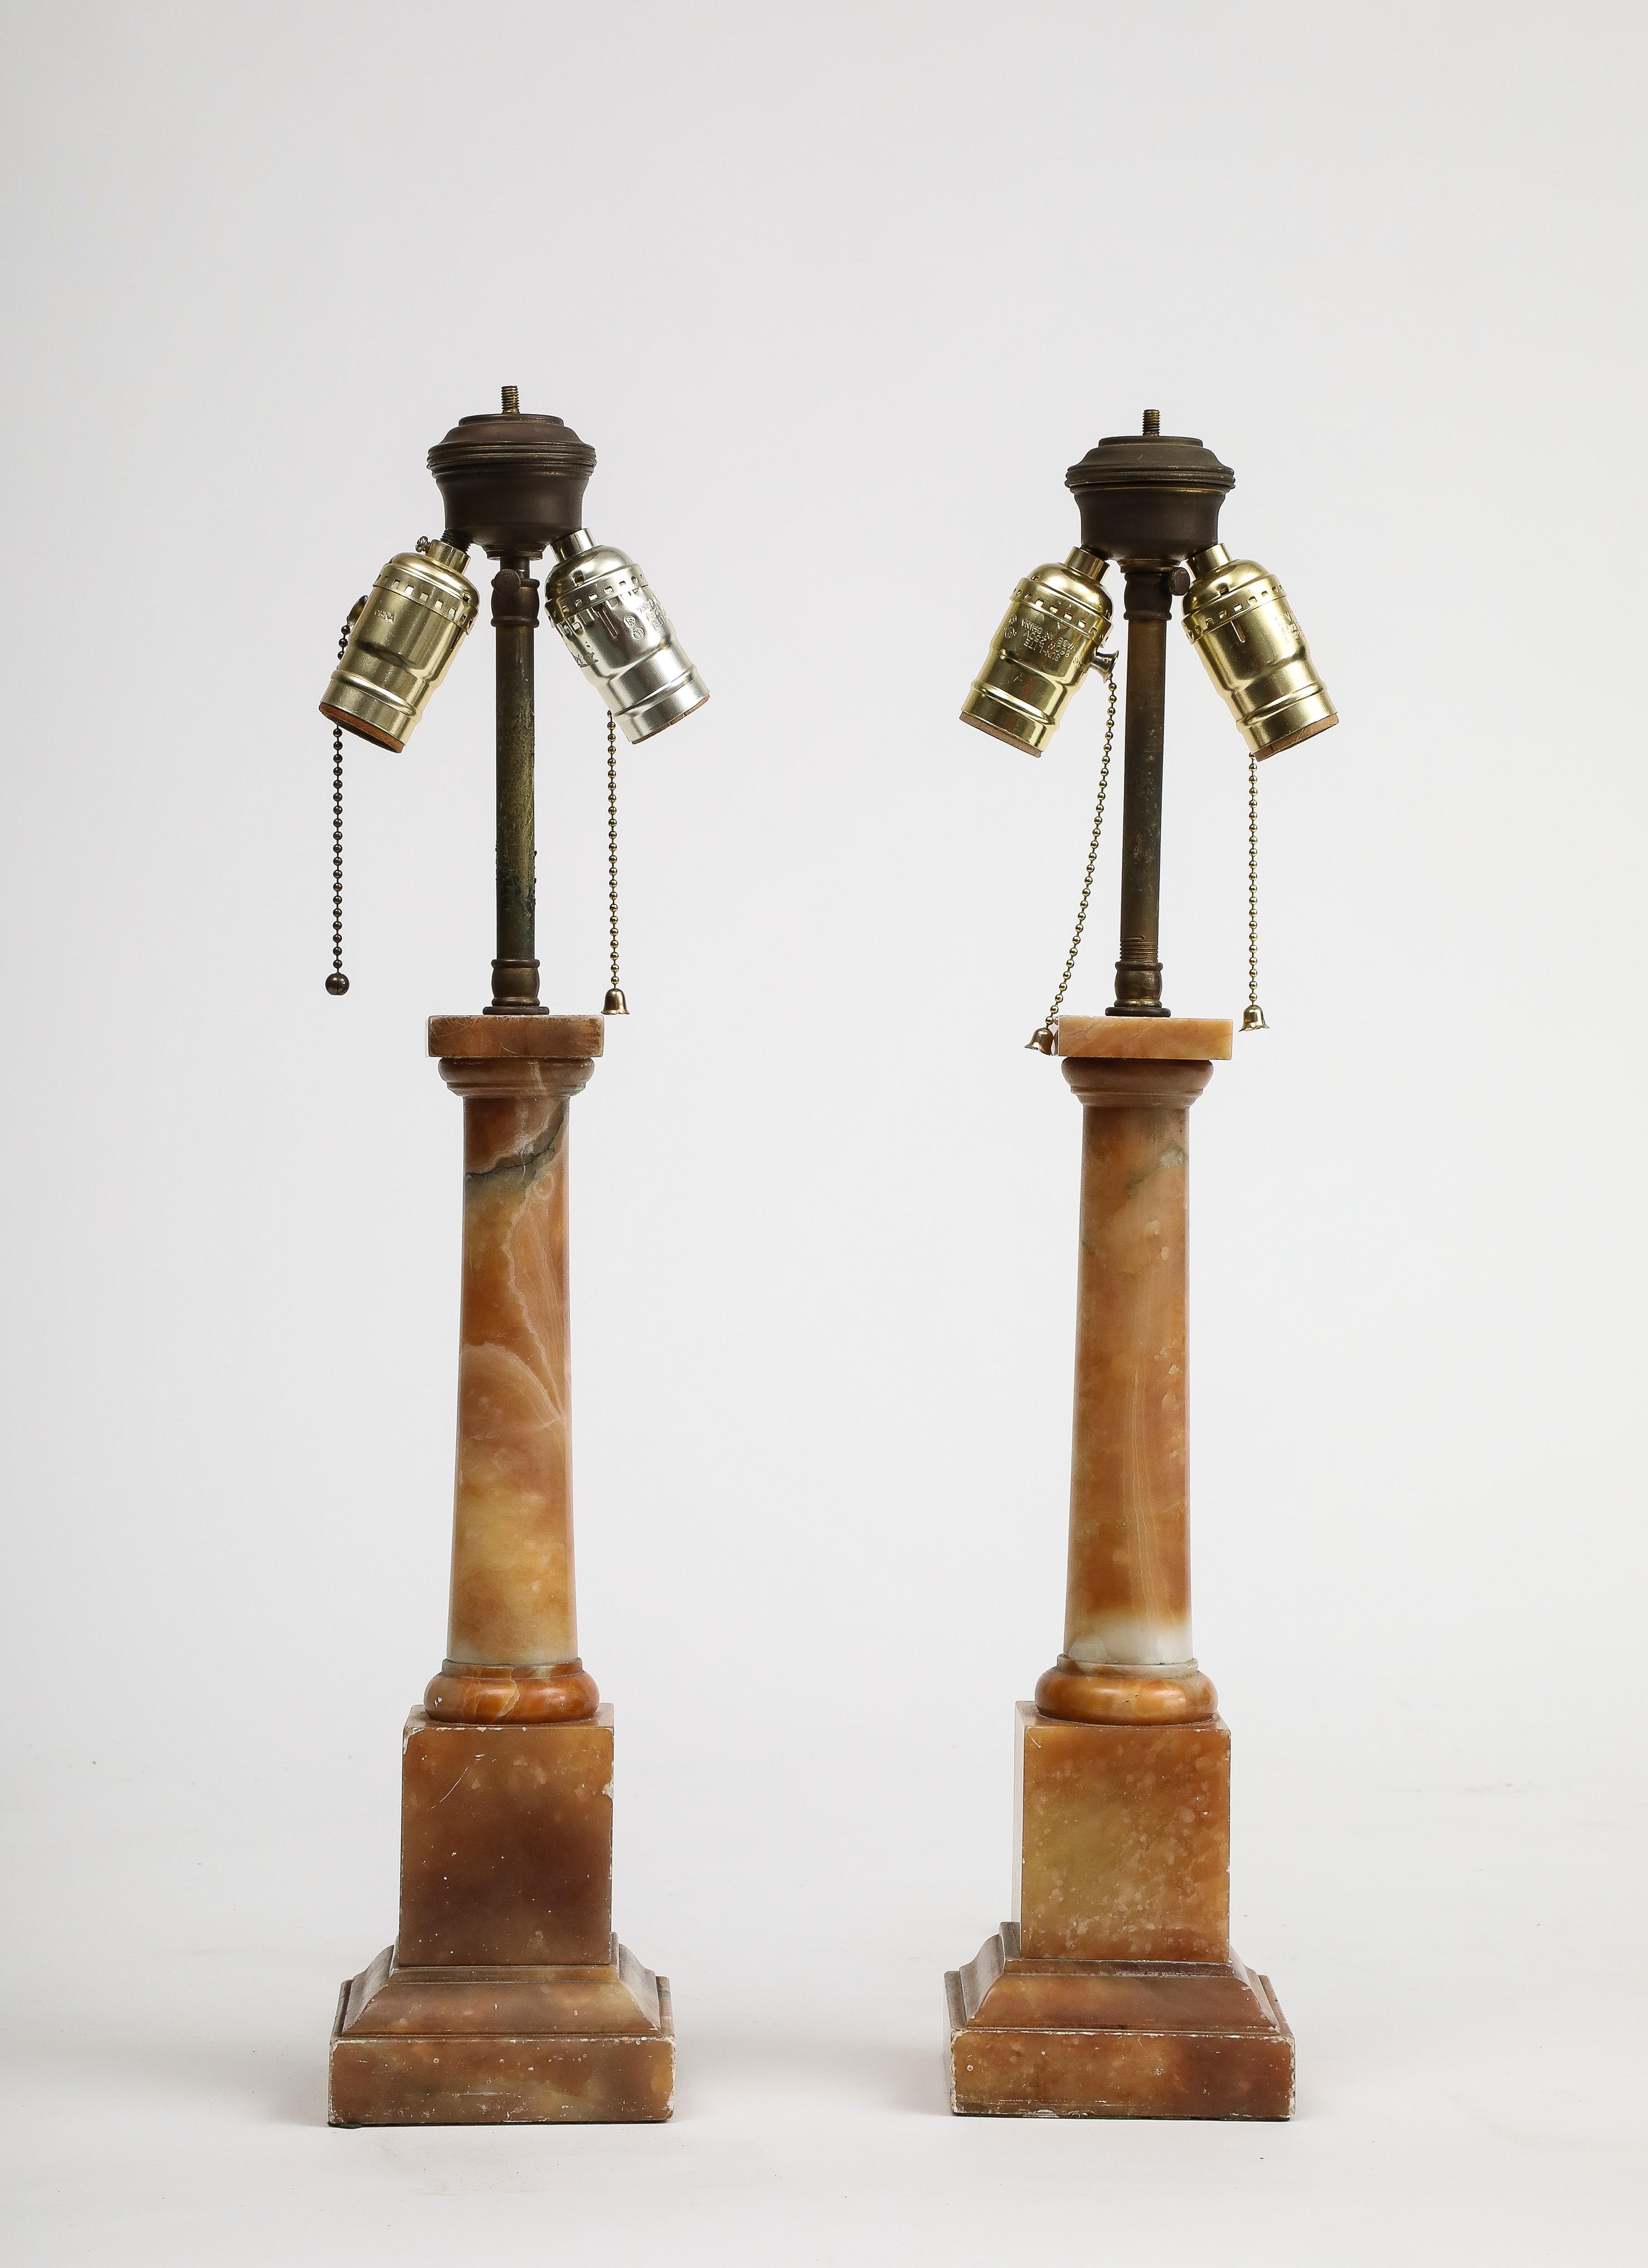 Pair of 1930s Art Deco Italian marble sculptural table lamps. Wired for USA, 2 sockets per lamp. 